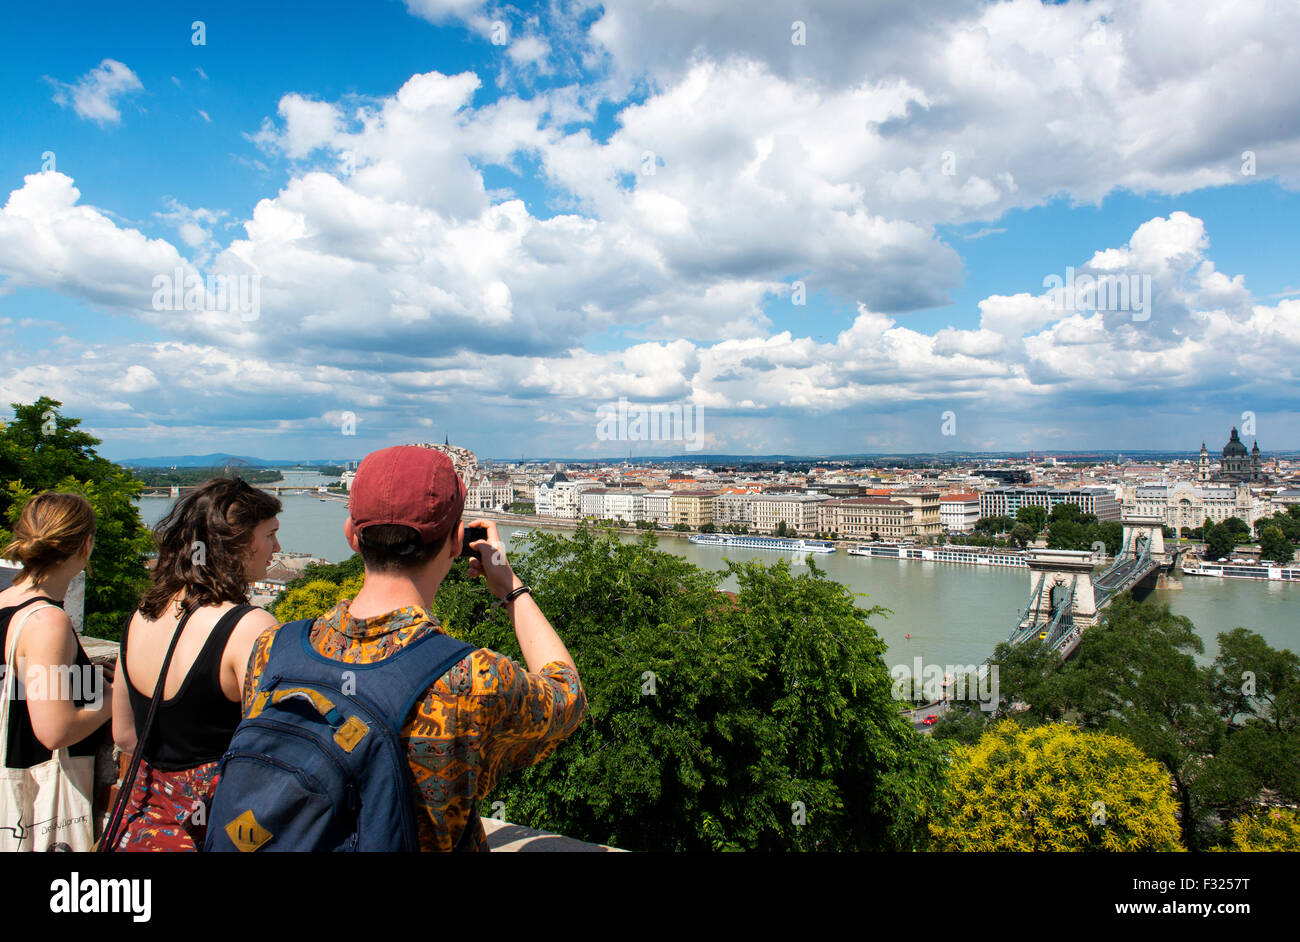 View from National Museum over Chain bridge, River Danube, Budapest, Hungary Stock Photo